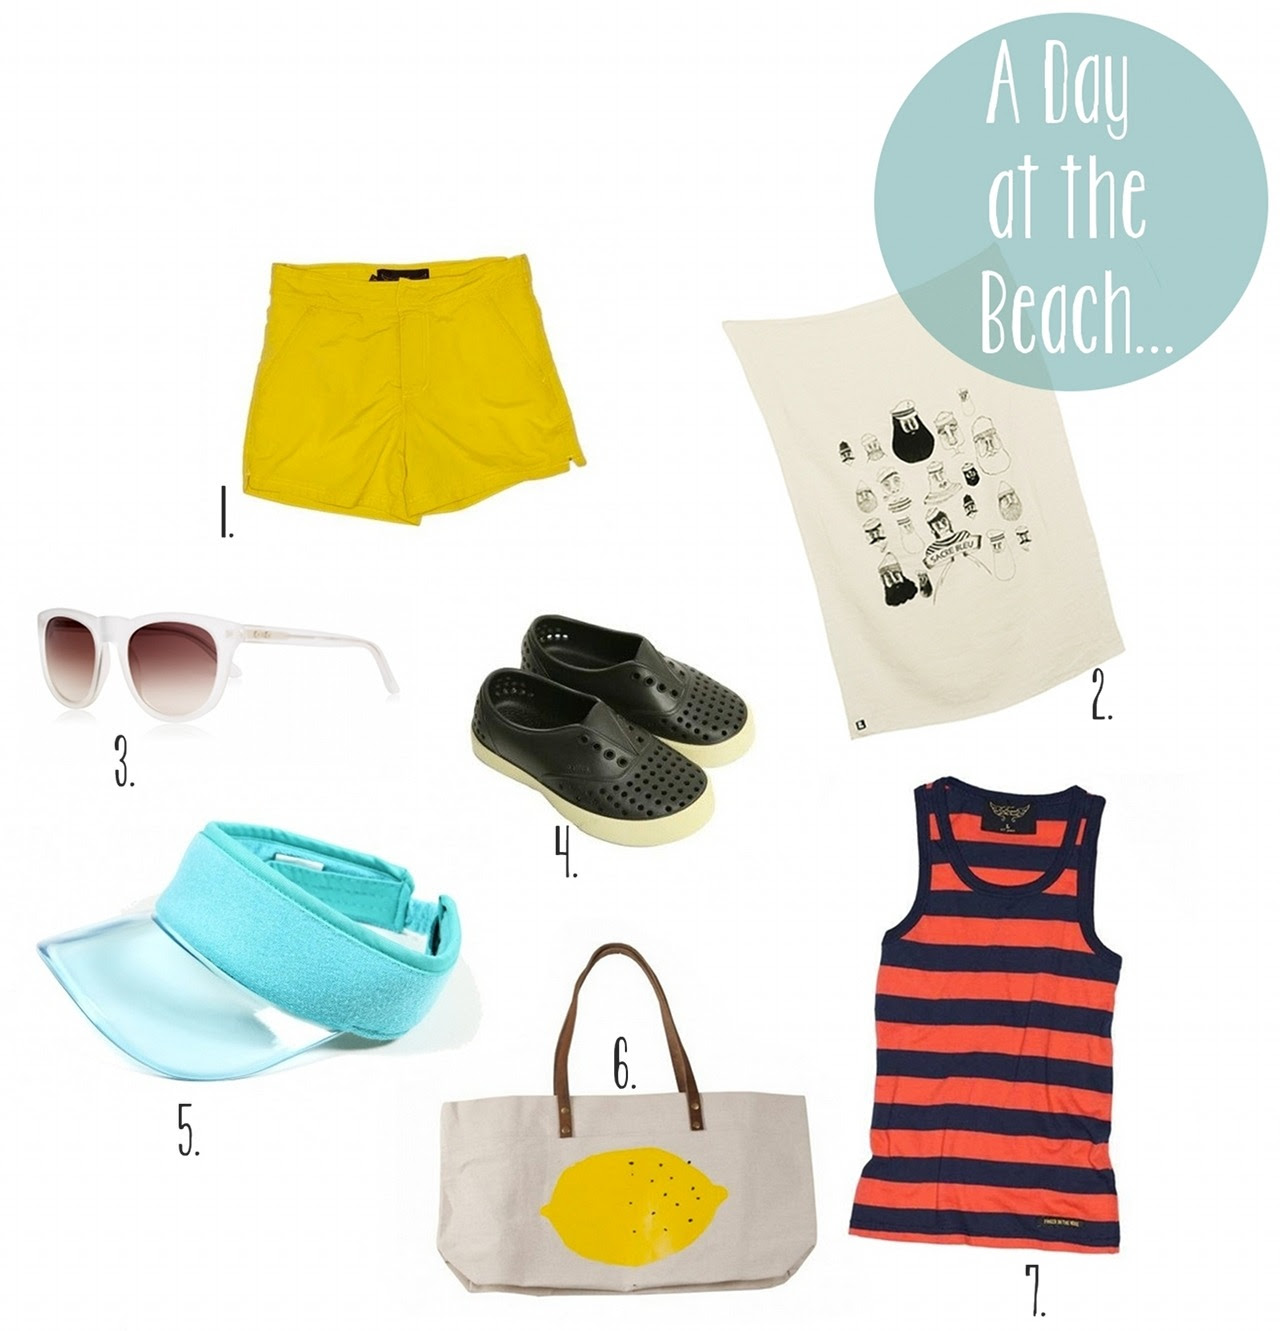 1. Yellow swim trunks by Finger in the nose / 2. Throw blanket by Mini &amp; Maximus / 3. White sunglasses by Sons &amp; Daughters / 4. Black shoes by Native / 5. Turquoise sun cap by Mini Rodini / 6. Canvas tote bag by Bobo Choses  / 7. Red striped tank top by Finger in the nose